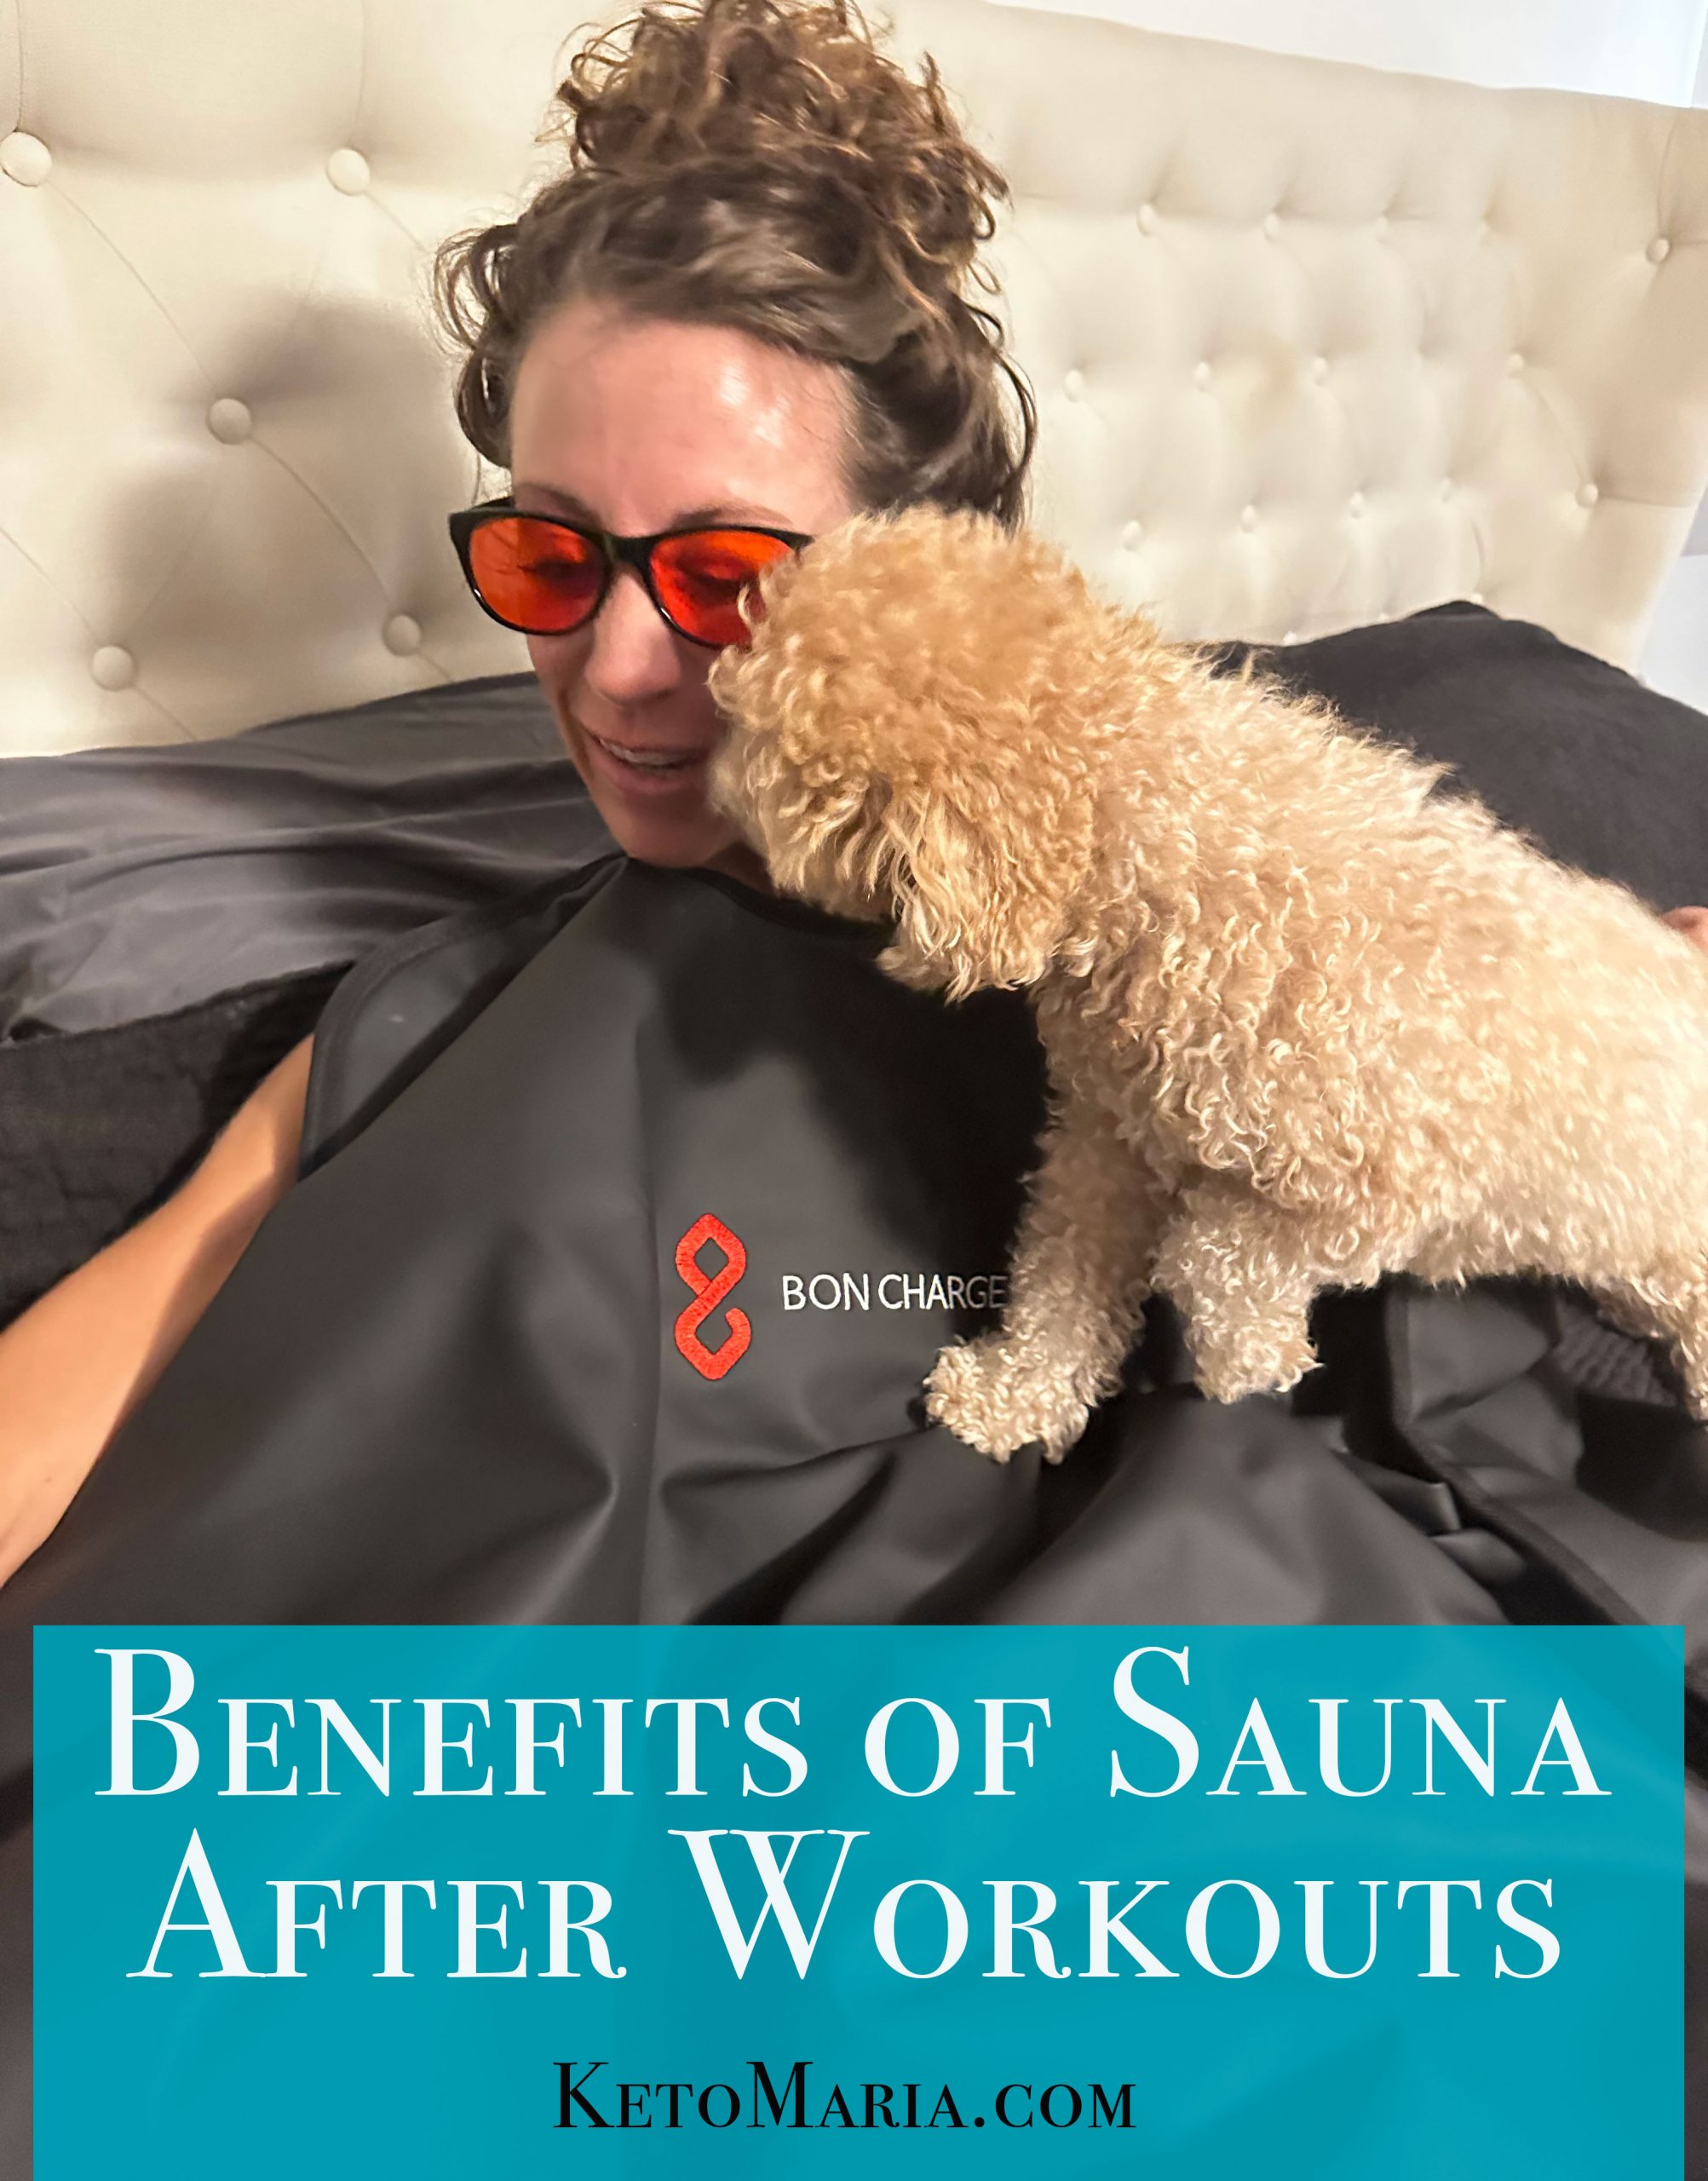 Benefits of Saunas after Workouts